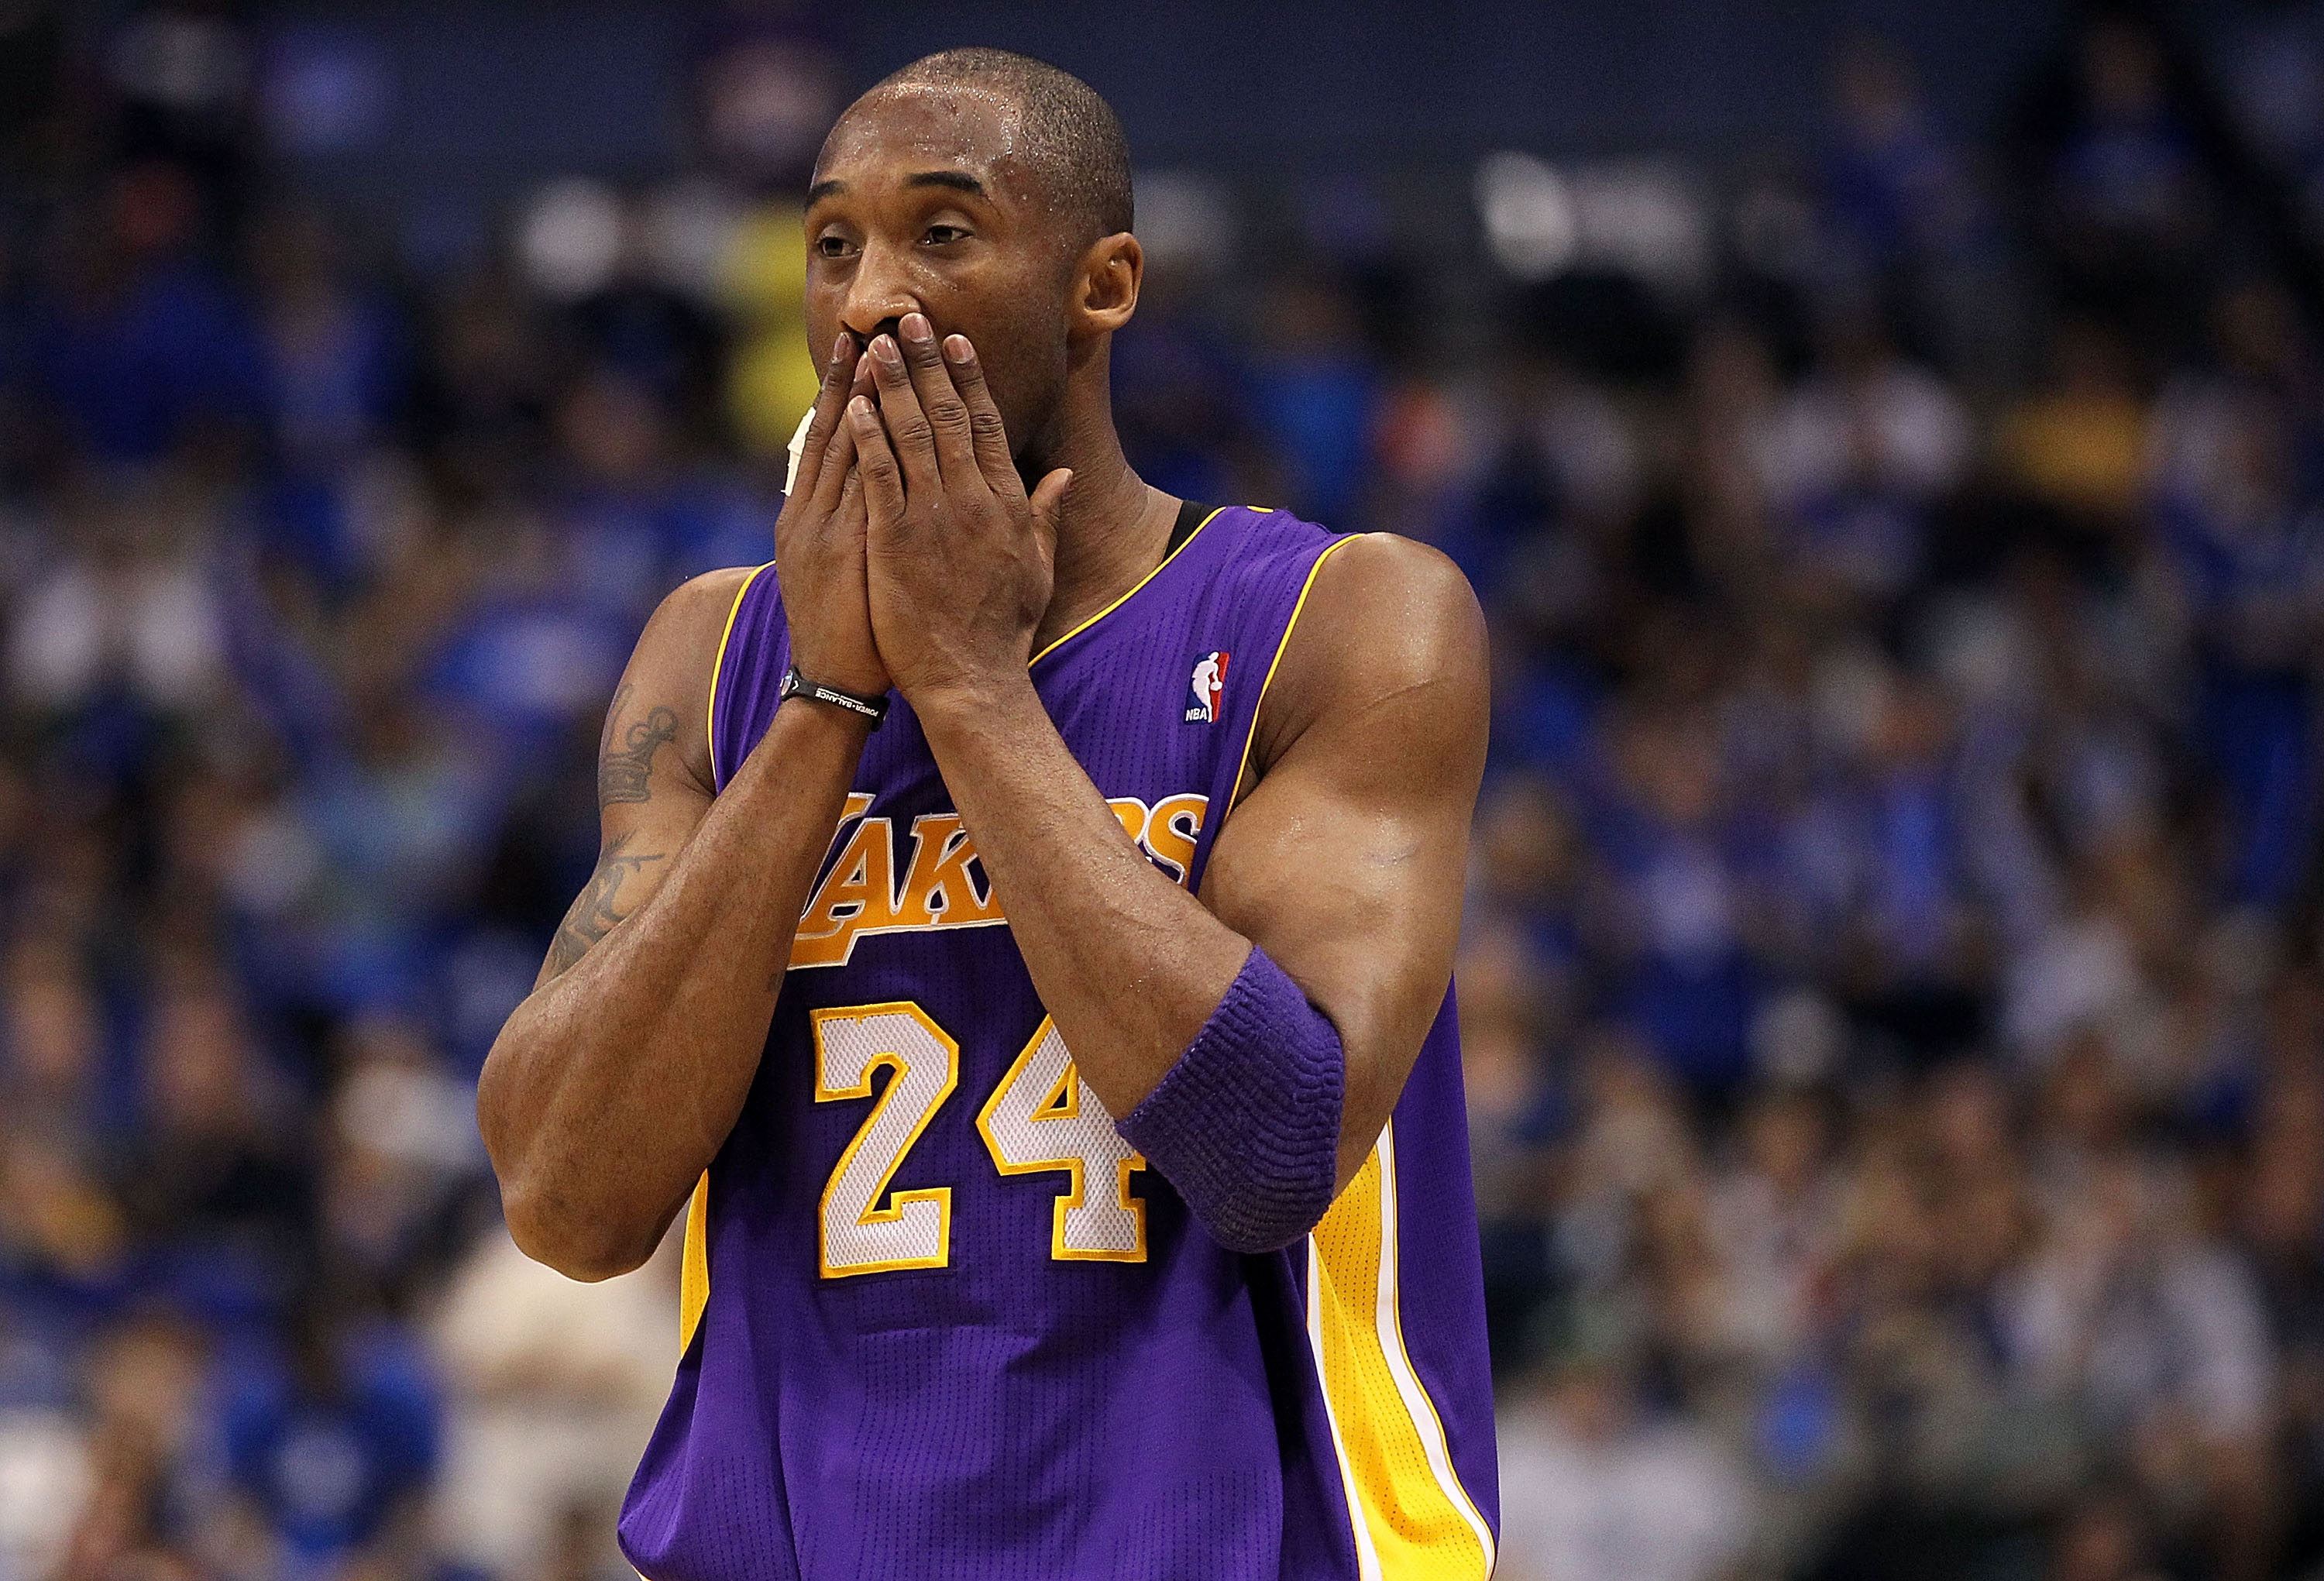 DALLAS, TX - MAY 08:  Guard Kobe Bryant #24 of the Los Angeles Lakers wipes his face during play against the Dallas Mavericks in Game Four of the Western Conference Semifinals during the 2011 NBA Playoffs on May 8, 2011 at American Airlines Center in Dall